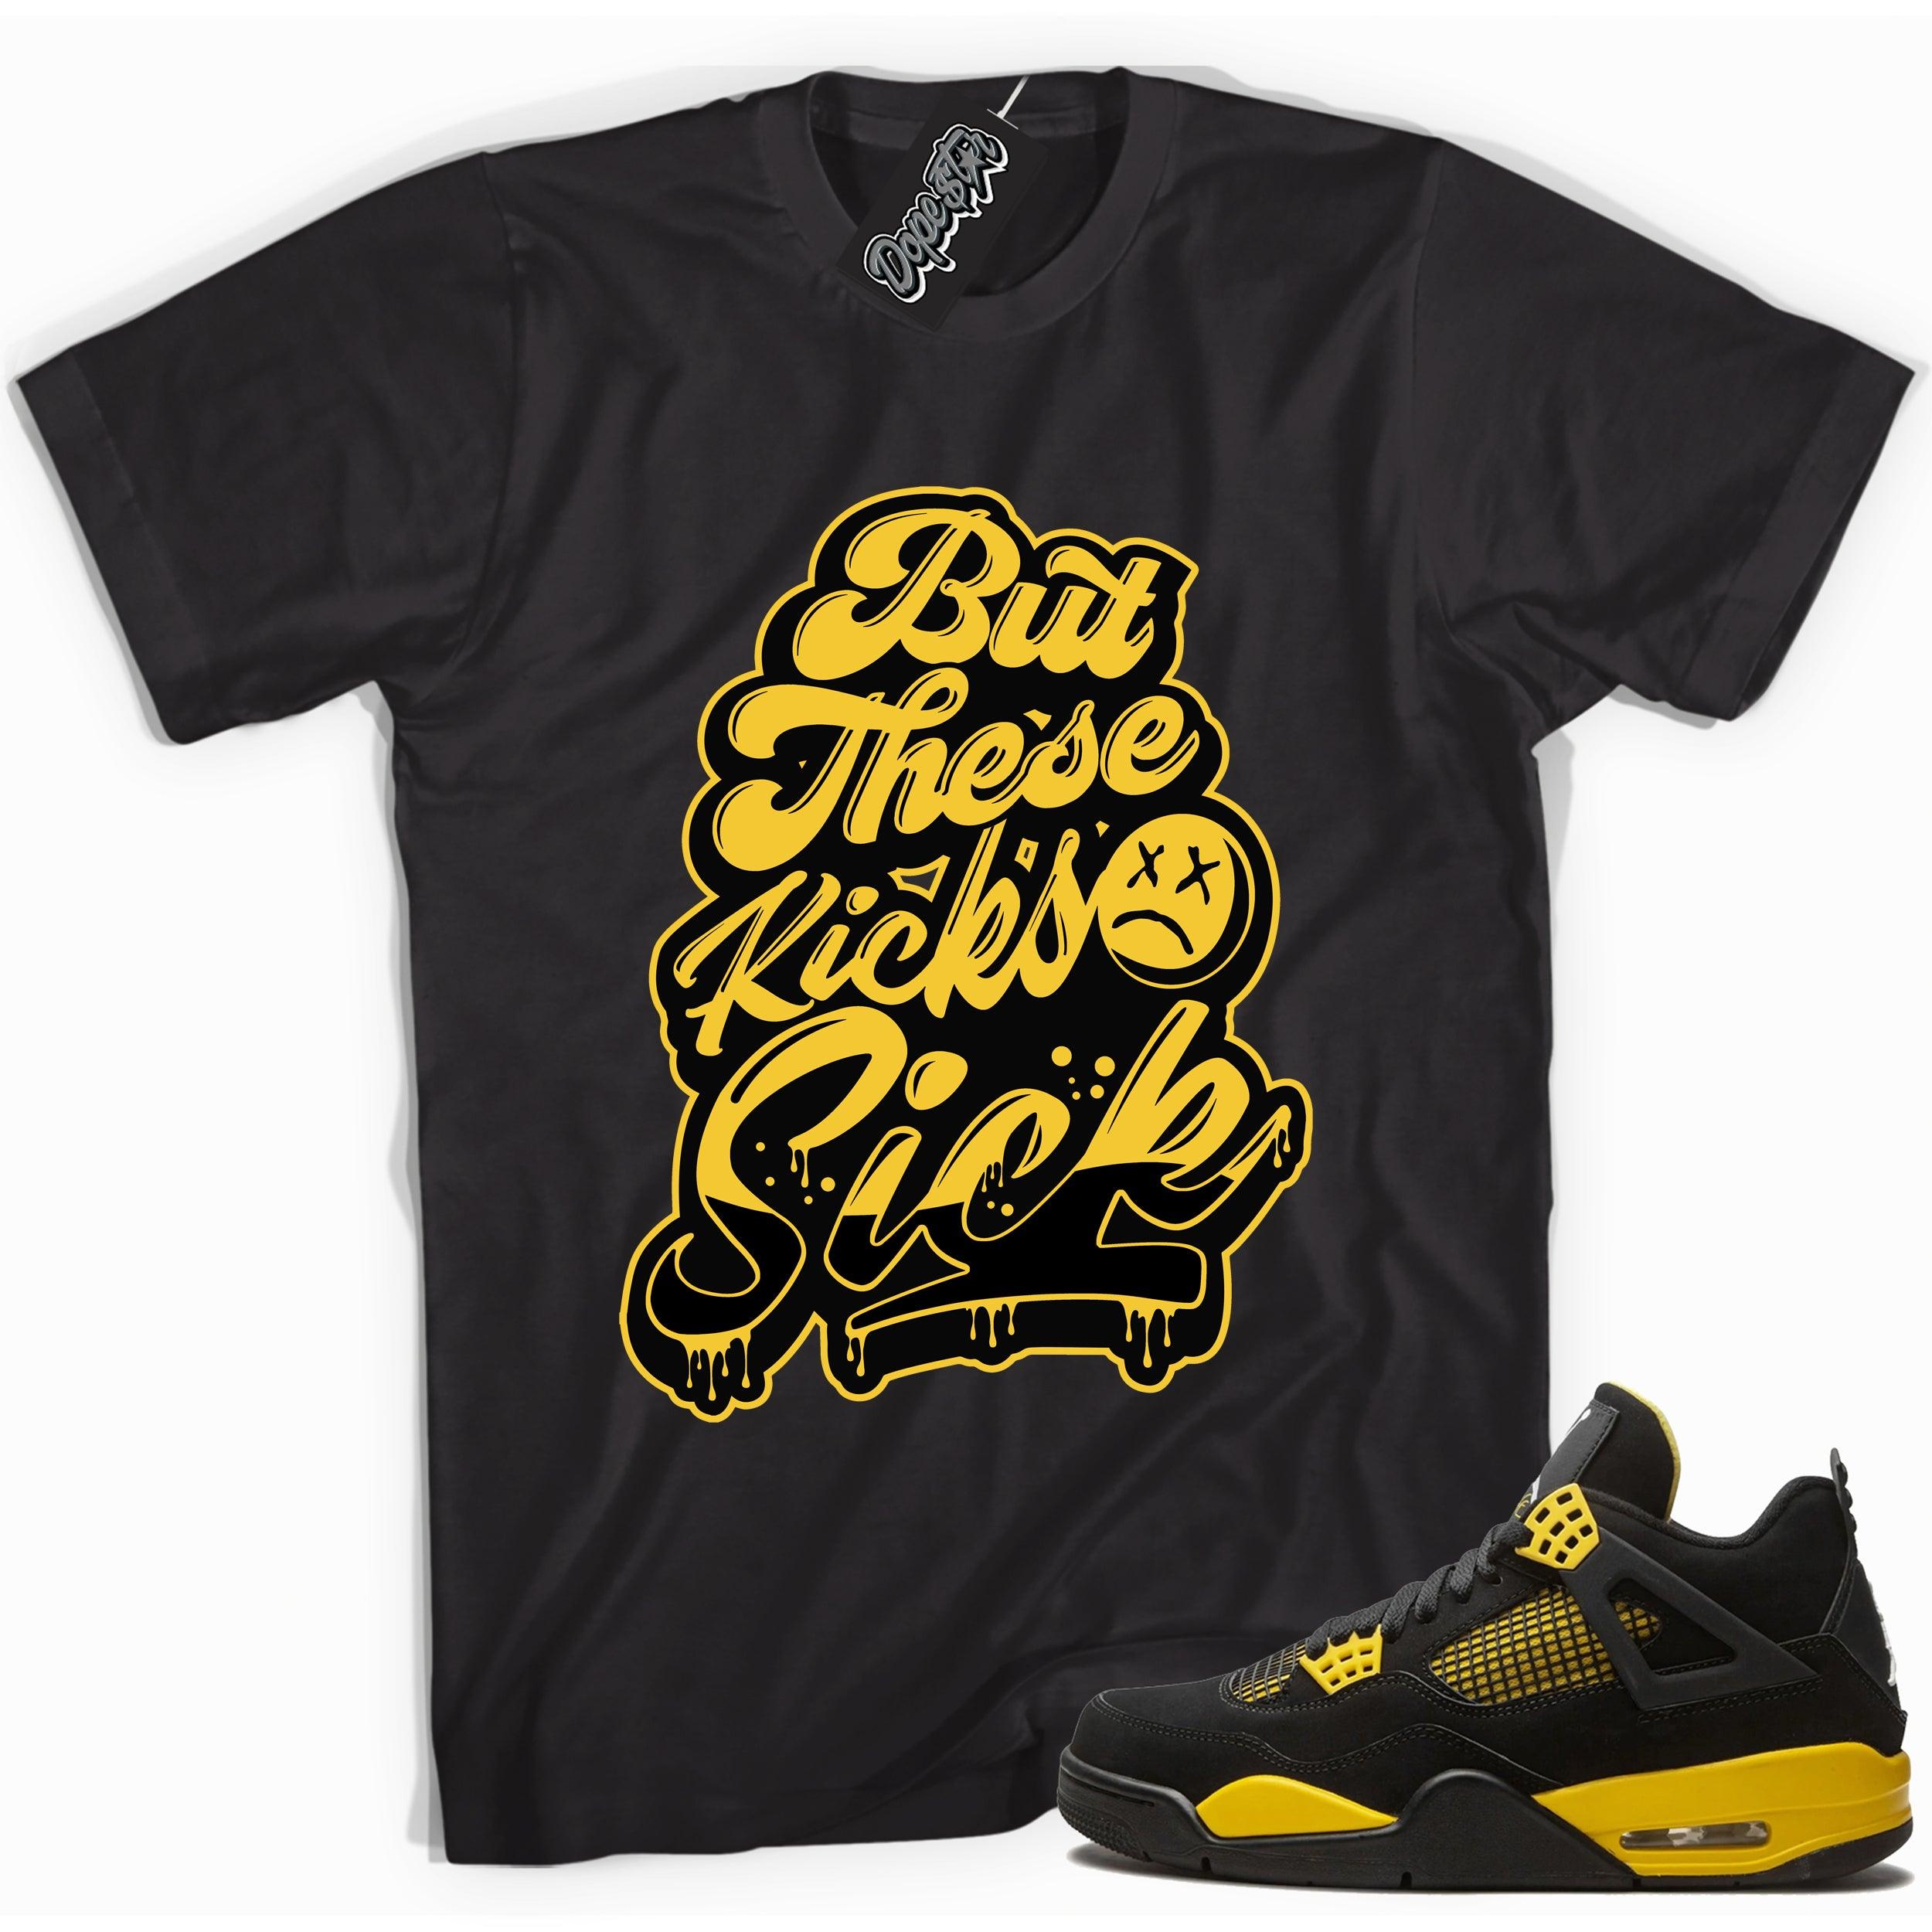 Cool black graphic tee with 'but these kicks sick' print, that perfectly matches  Air Jordan 4 Thunder sneakers